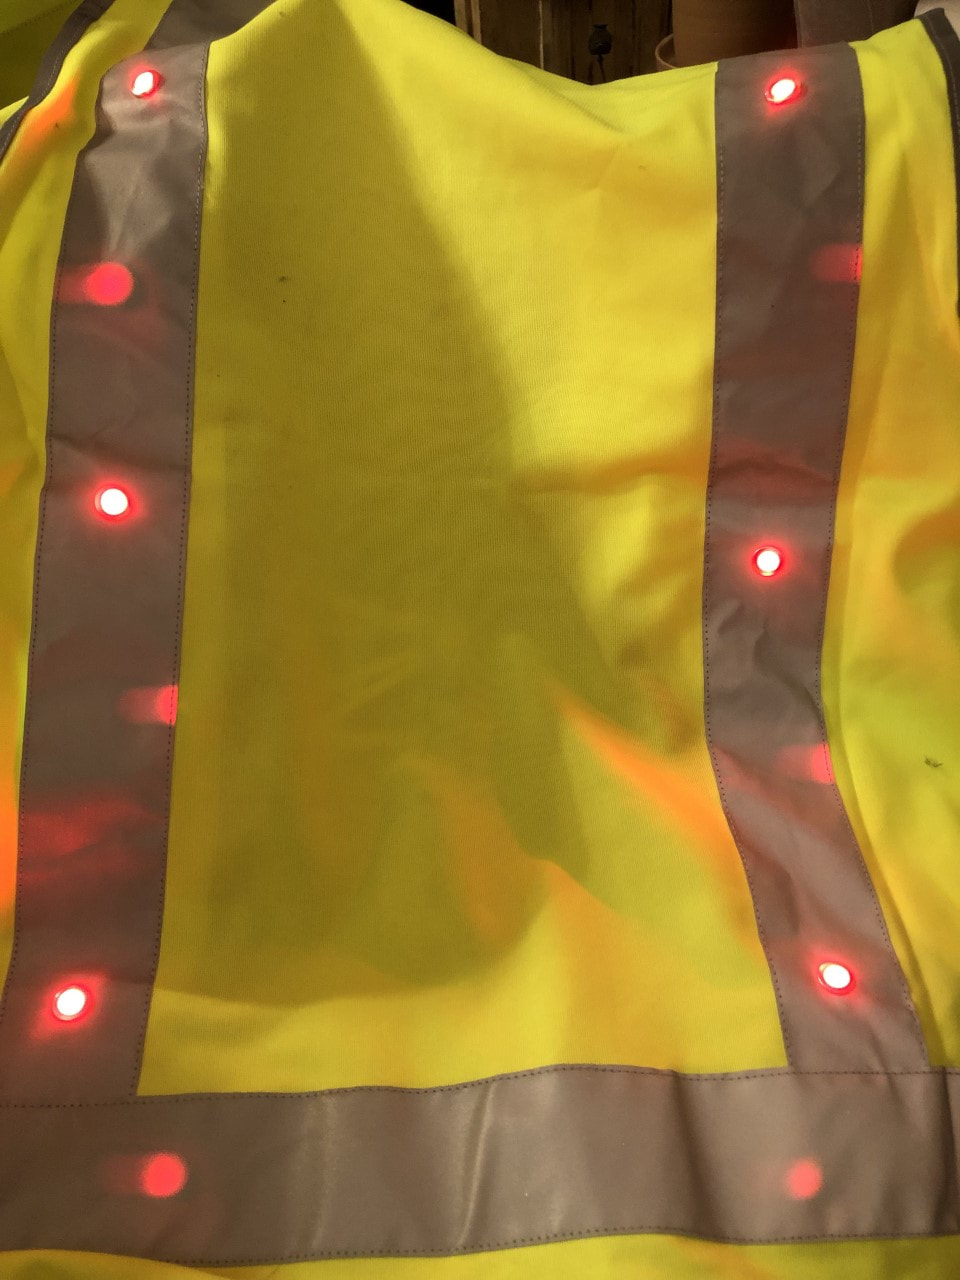 The rear of the Vizirider vest, showing the 6 red LED lights